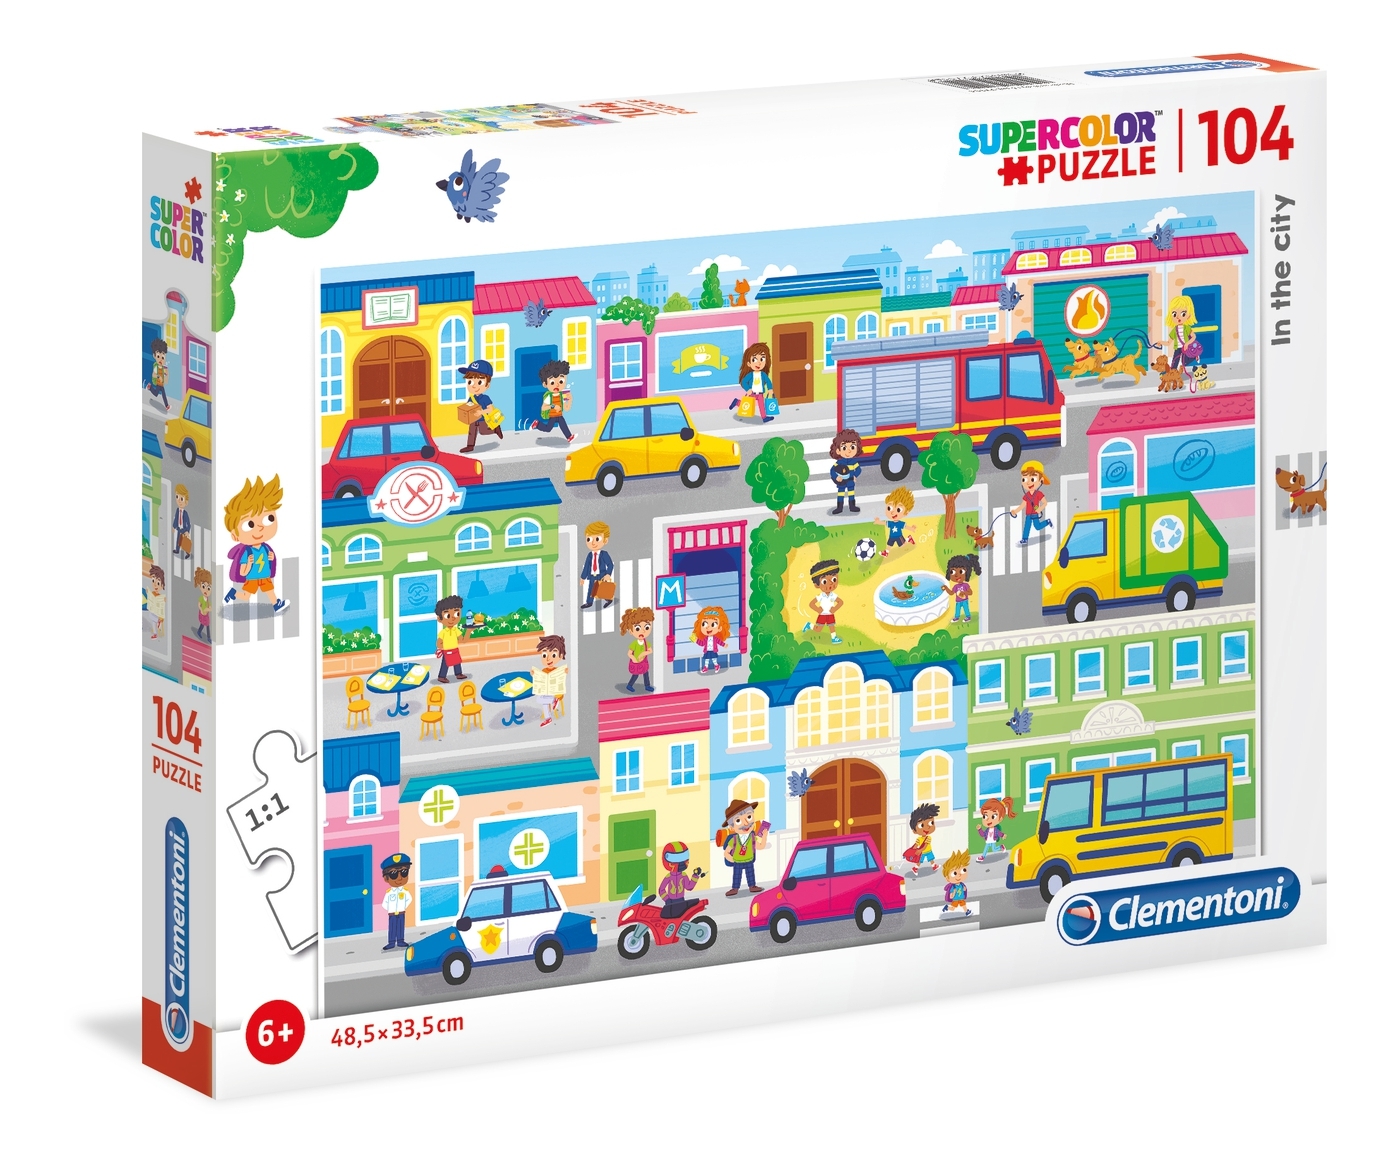 Puzzle SuperColor 104: In the City (27114)